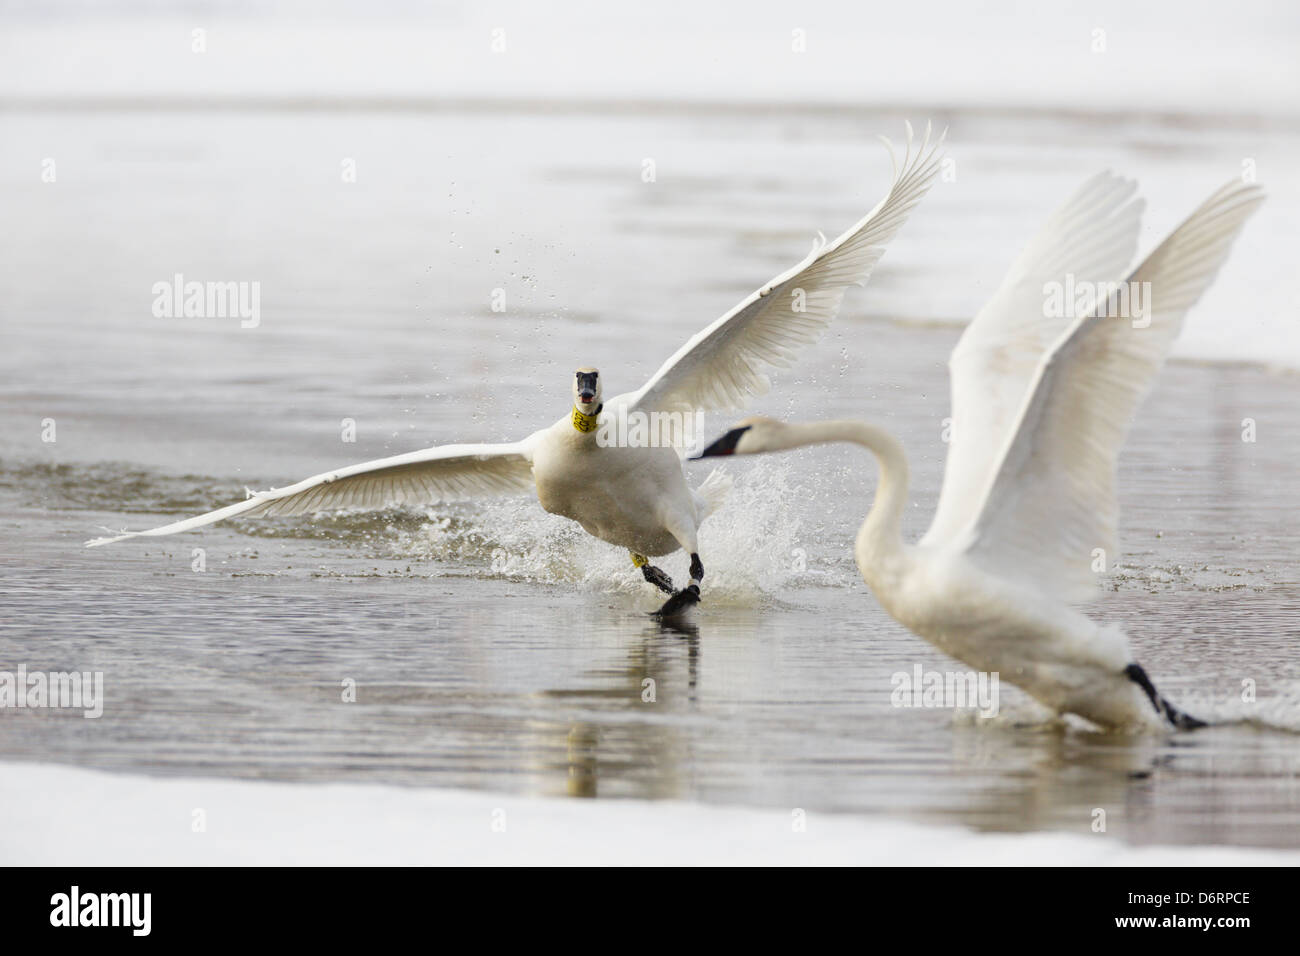 An aggressive Trumpeter Swan, Cygnus buccinator, launches an attack on a rival. Stock Photo